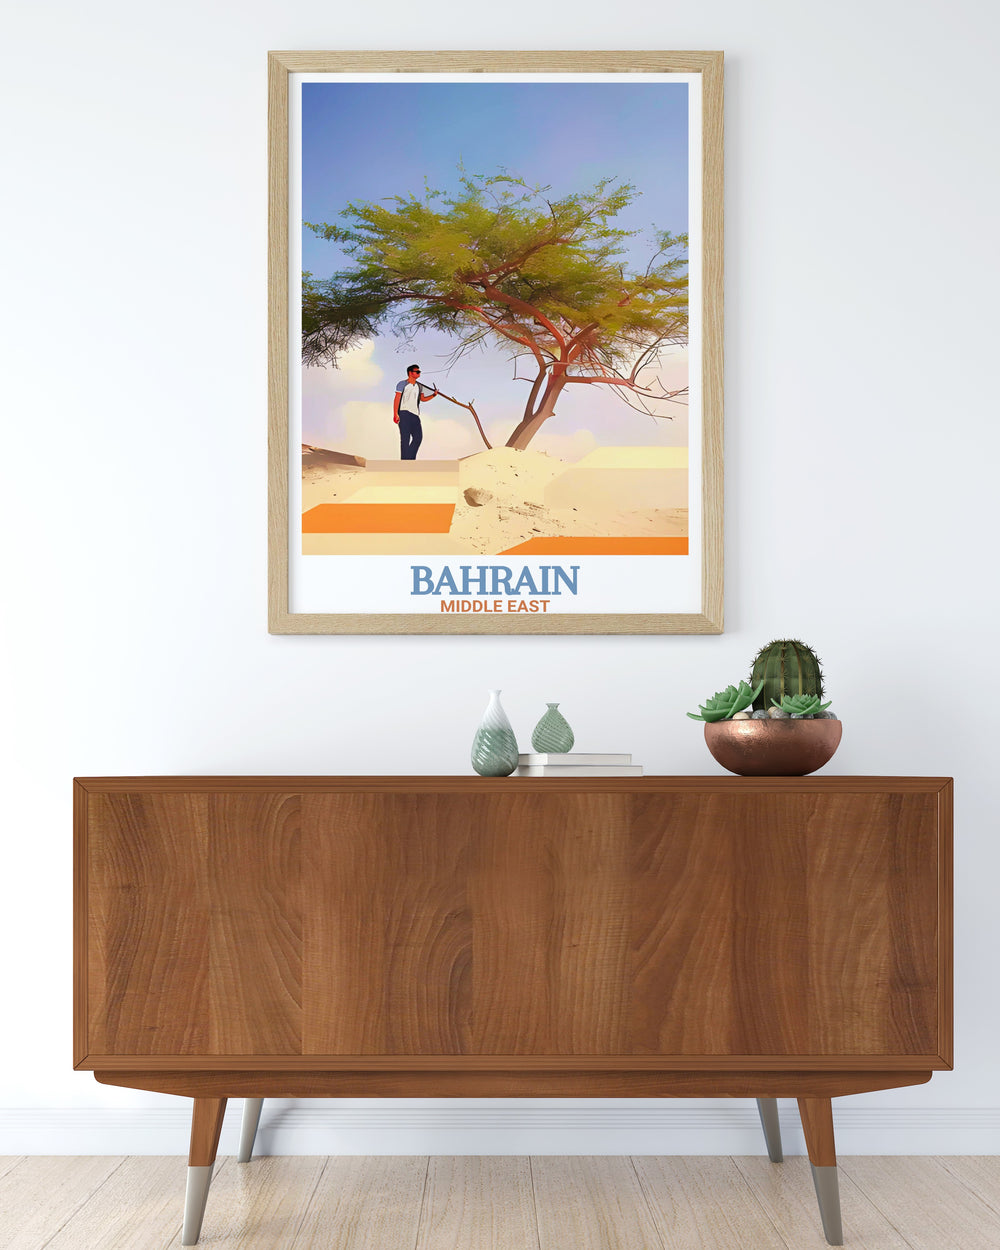 Beautiful Bahrain Poster showcasing the Tree of Life with exquisite detail ideal for wall hanging or as a gift that celebrates the cultural richness and natural wonder of Bahrain.